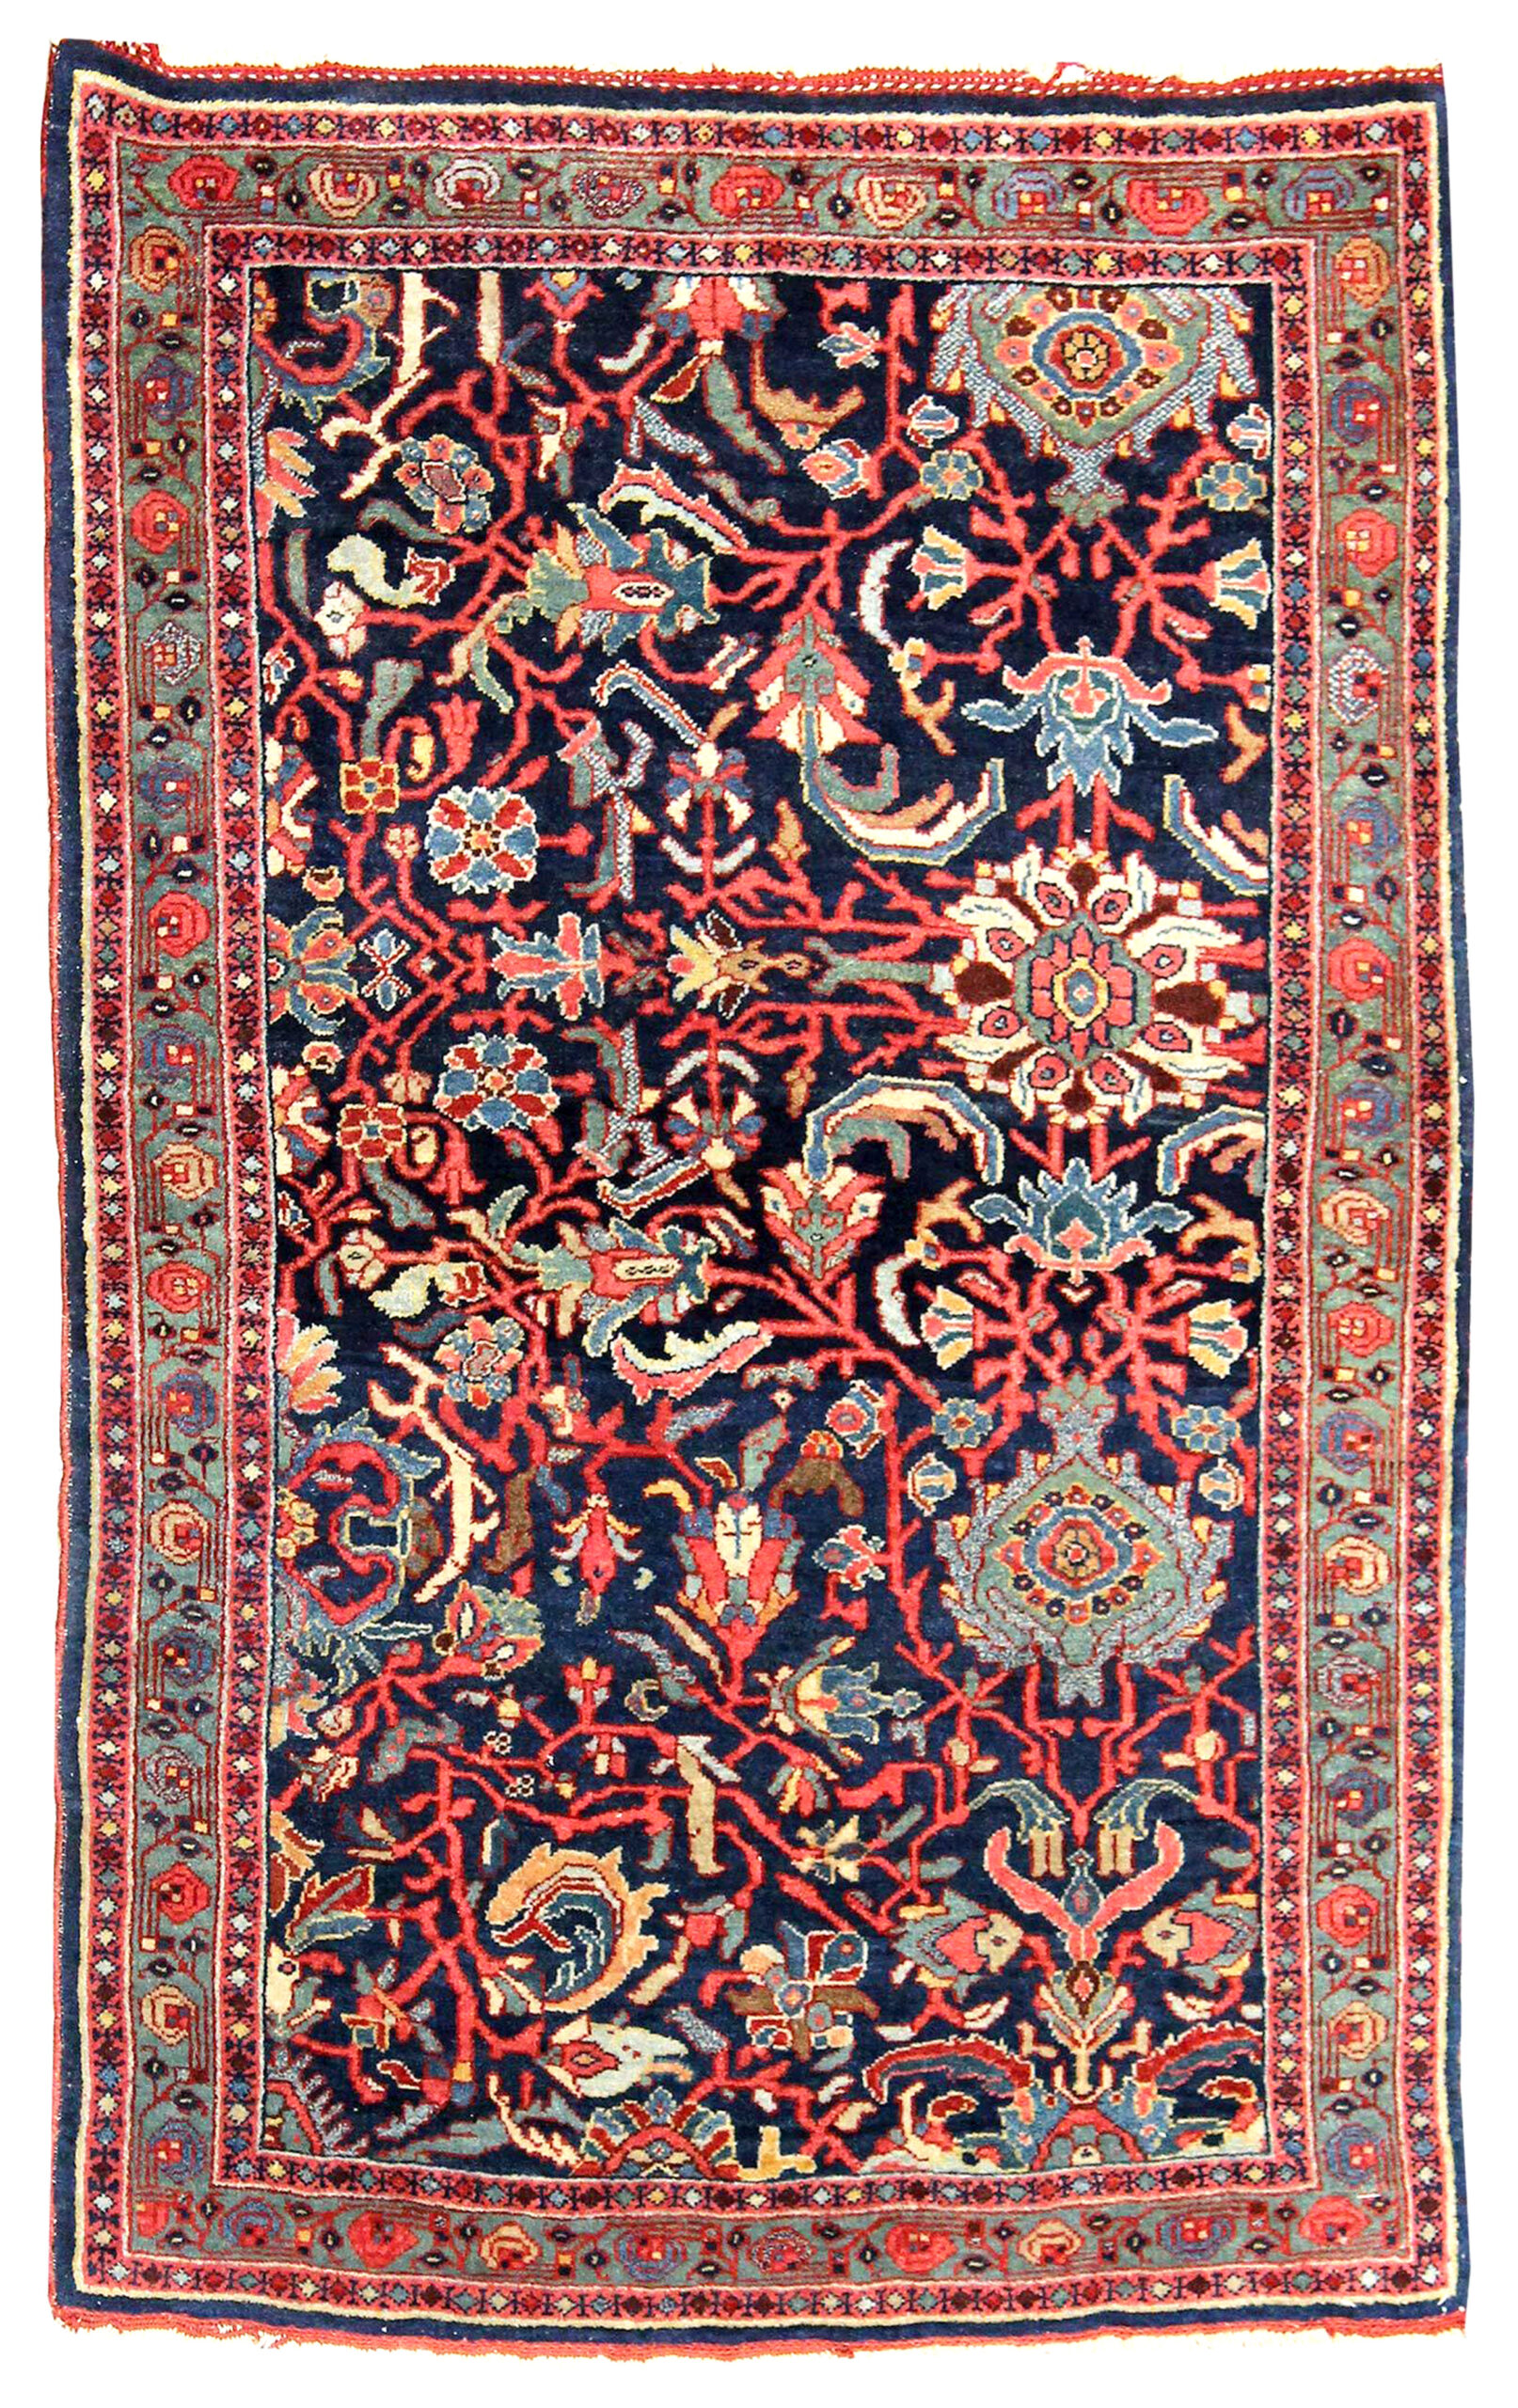 Antique Bidjar rug, possibly a Sampler or Wagireh, with palmettes, leaves and flowers on a navy blue field, northwest Persia, circa 1910